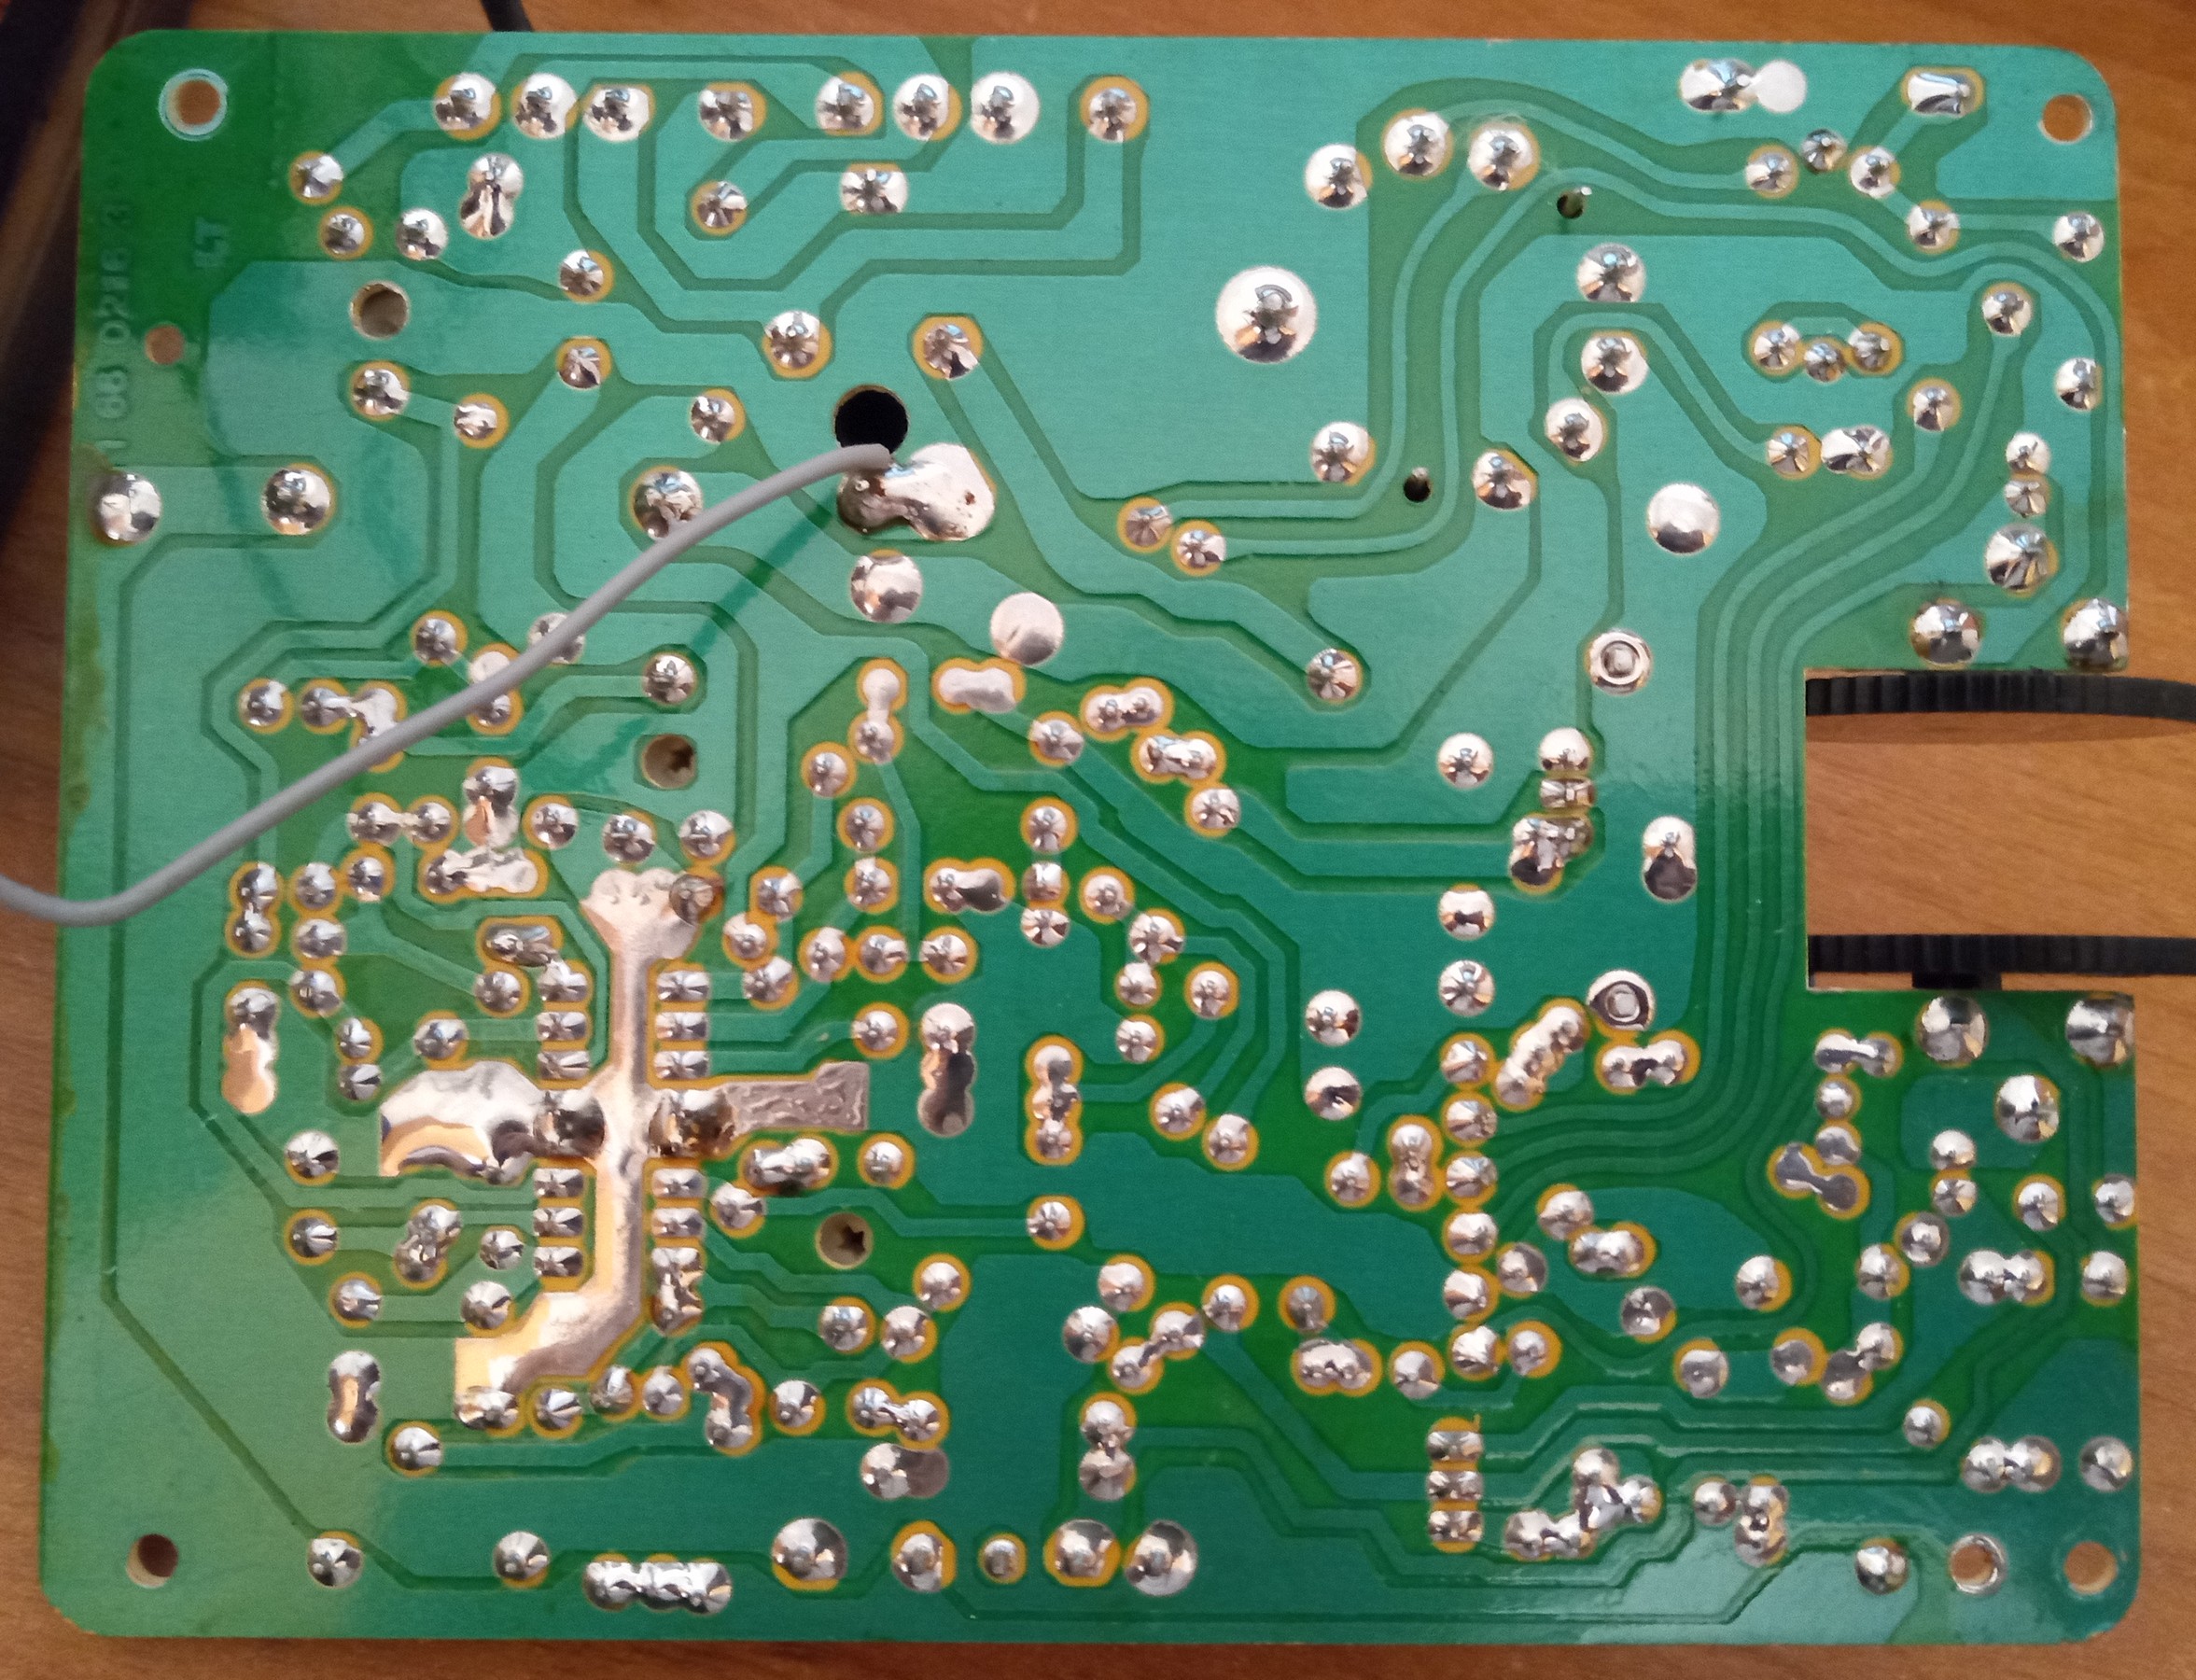 Top side of PCB labeled 1 66 0216 3